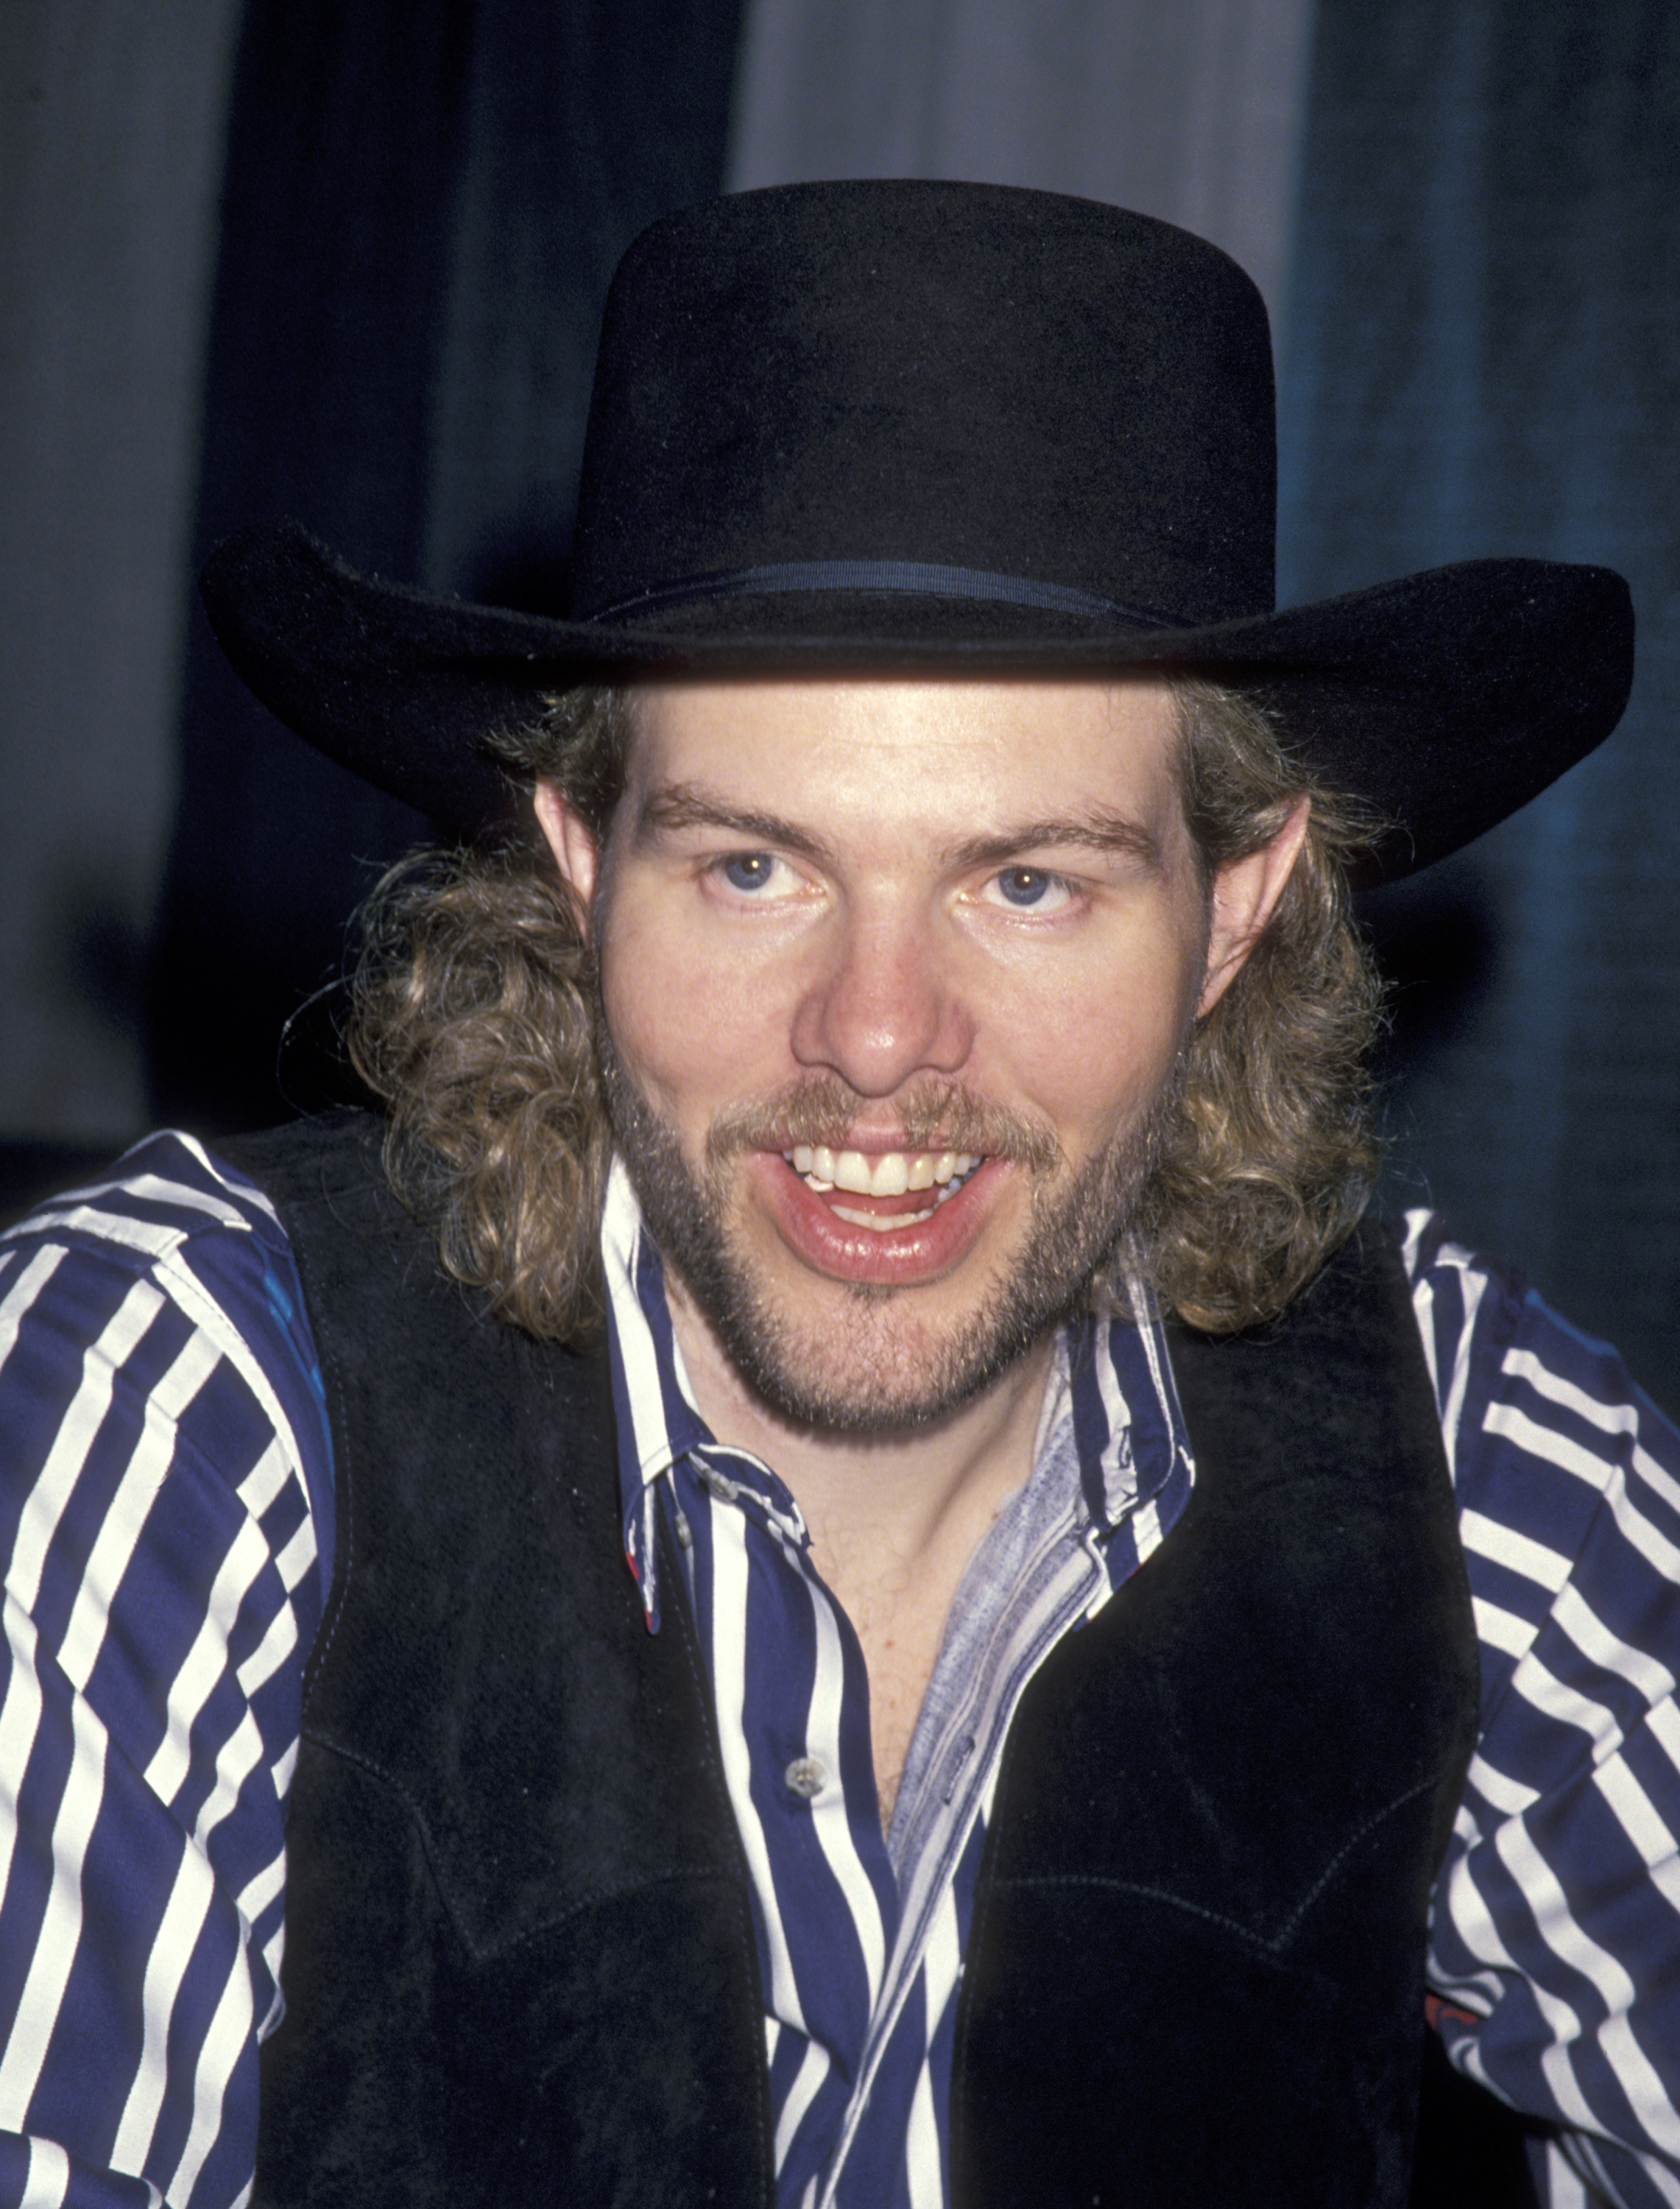 Toby Keith attends the 1994 Country Music "Fanfest" in Pomona, California | Source: Getty Images